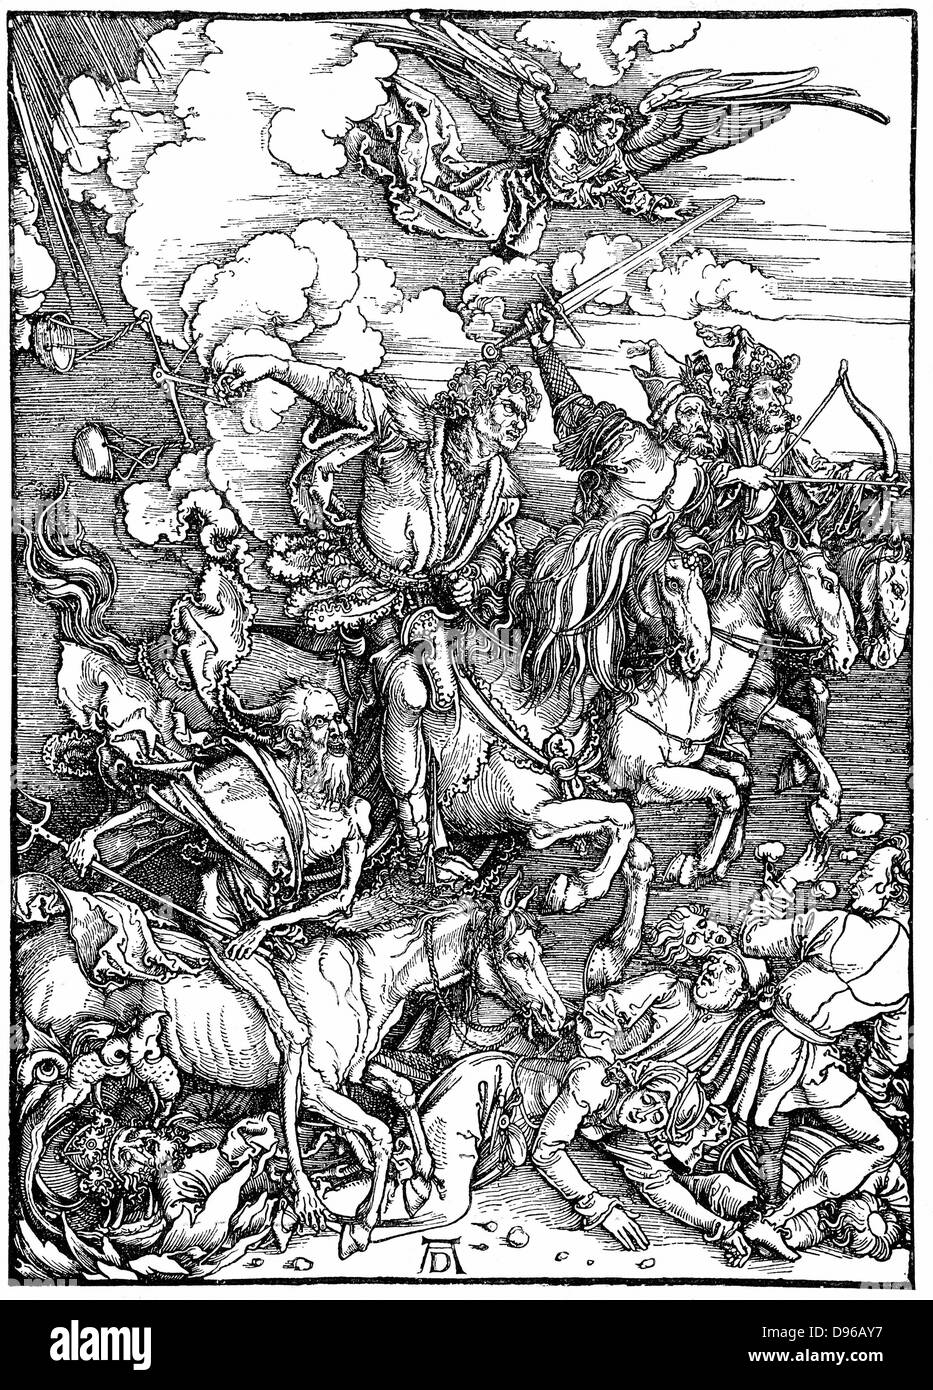 Four Horsemen of the Apocalypse, illustrating 'Bible' New Testament, Revelation of St John. Archangel watches as four agents of destruction, two of war and one each of famine and pestilence, gallop across the earth. Woodcut by Albrecht Durer, 1498. Stock Photo